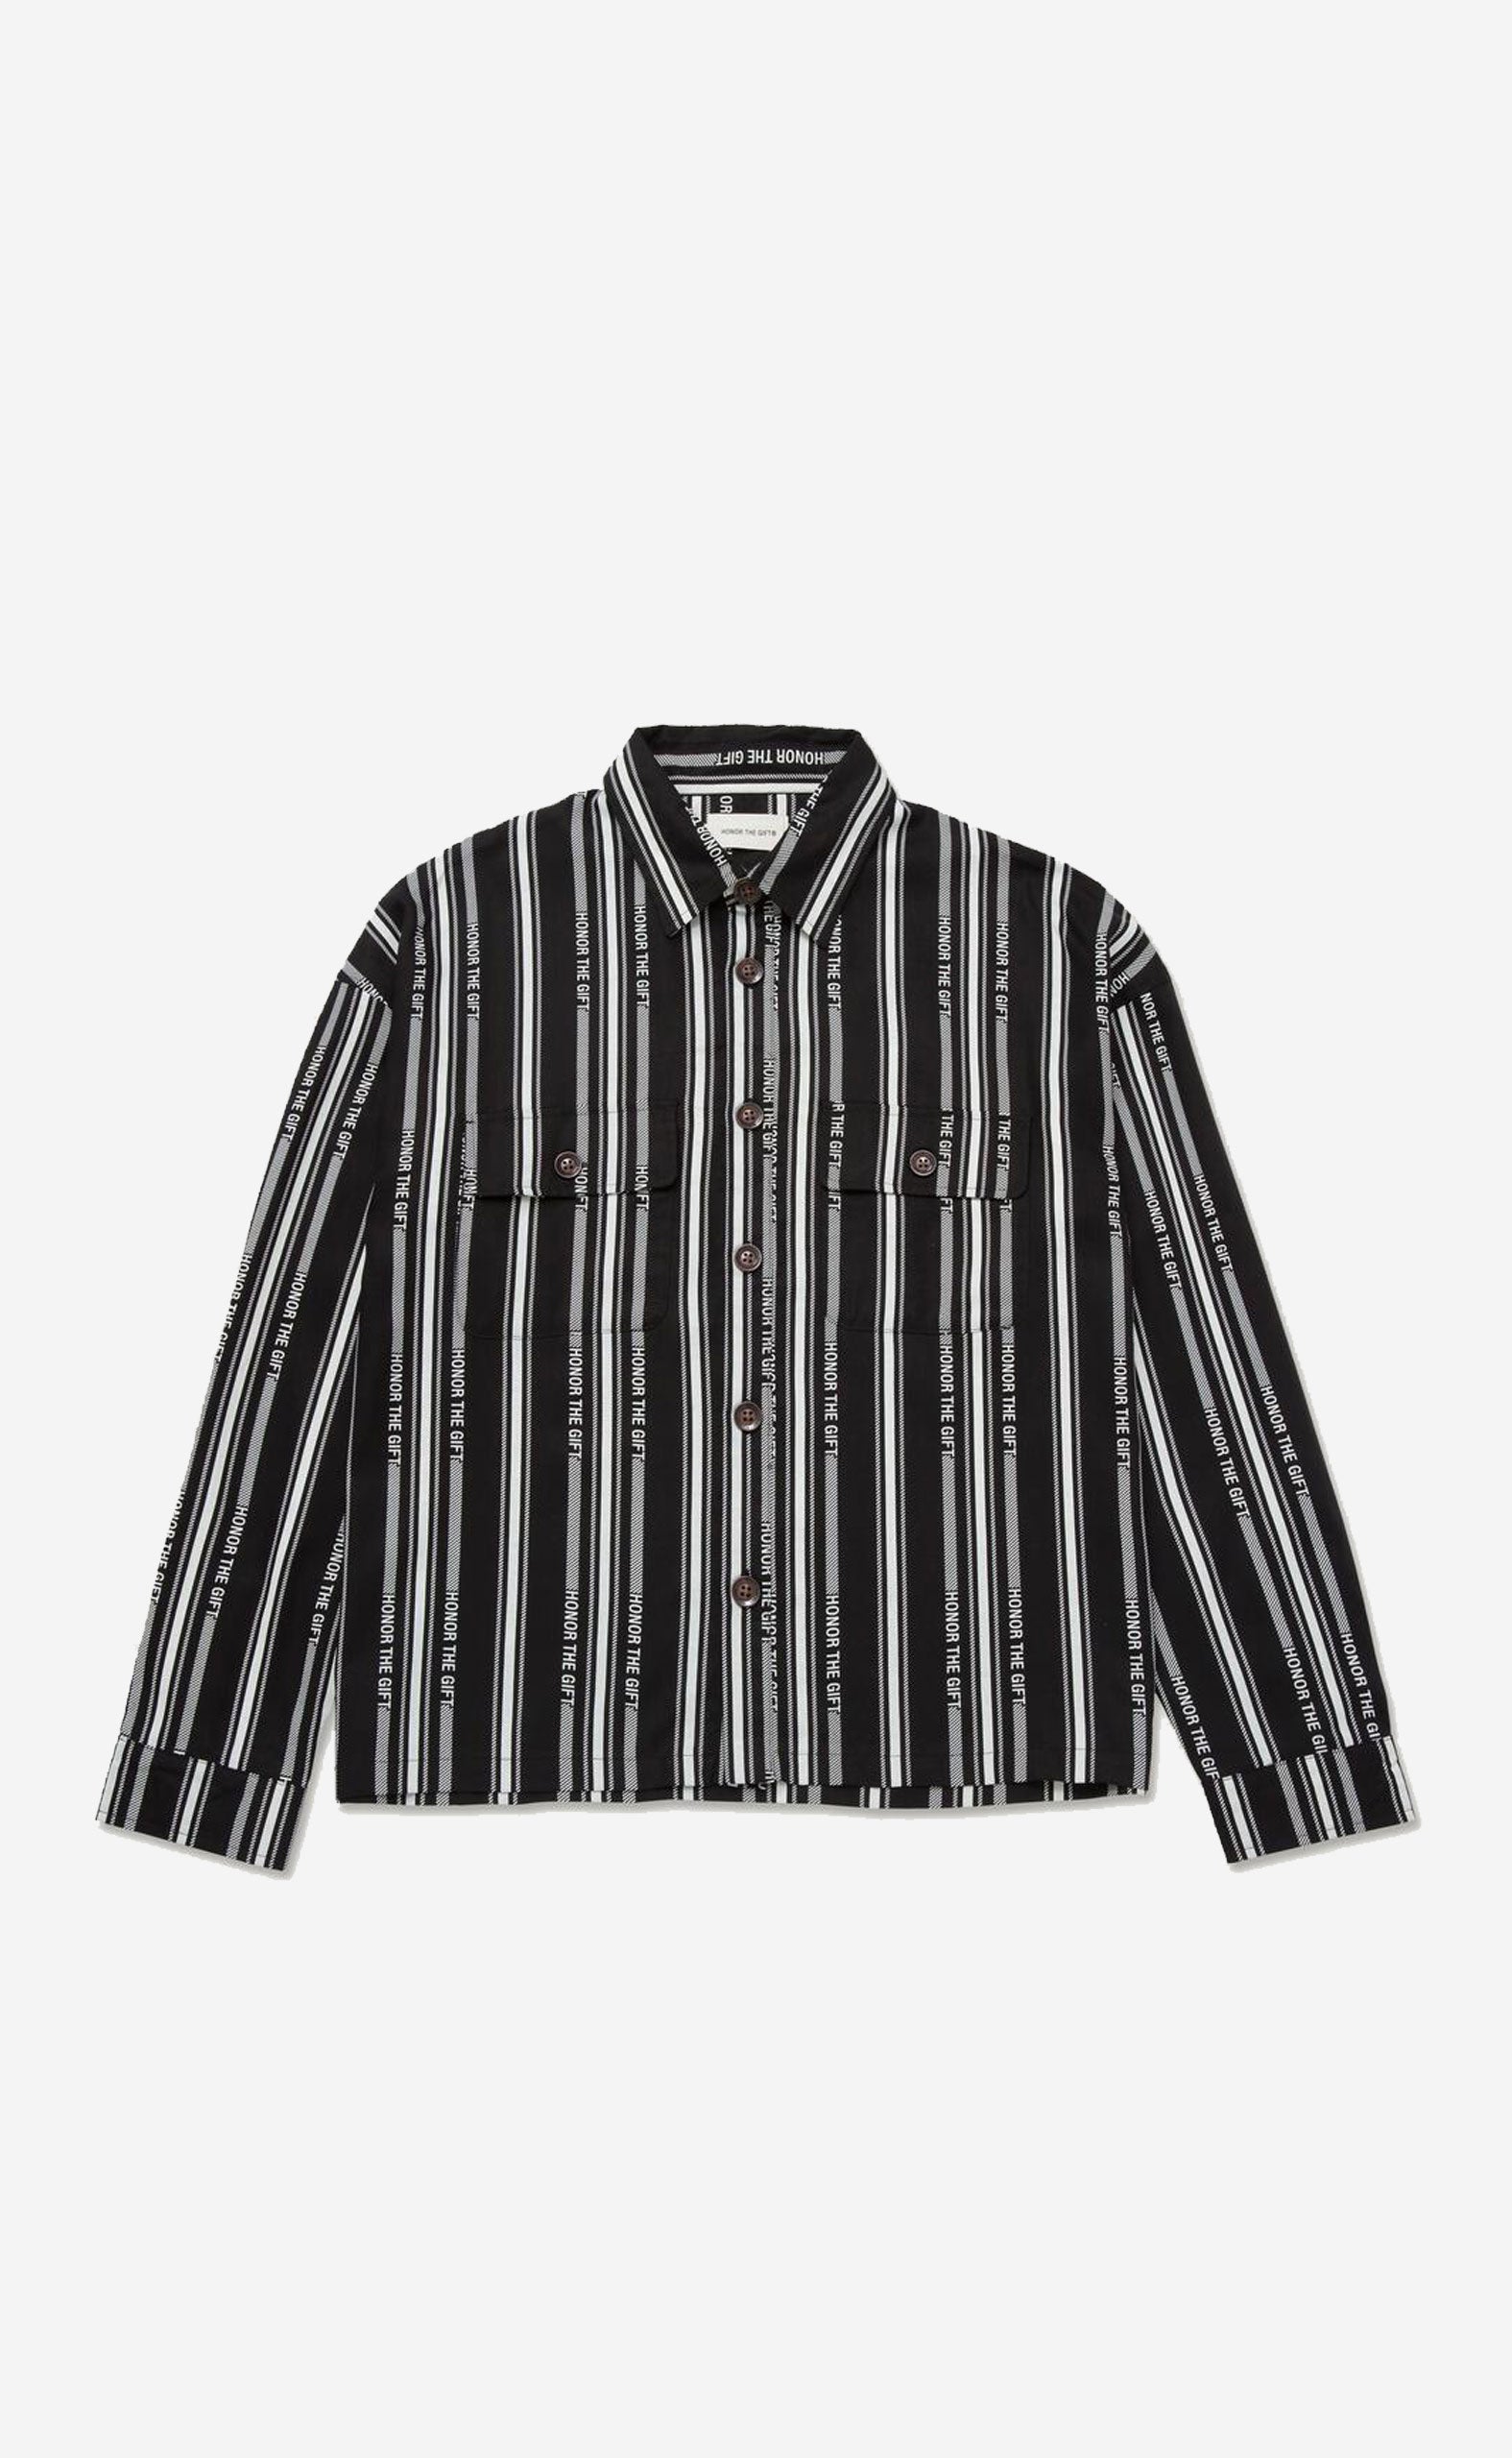 BLACK C-FALL HONOR STRIPE BUTTON UP